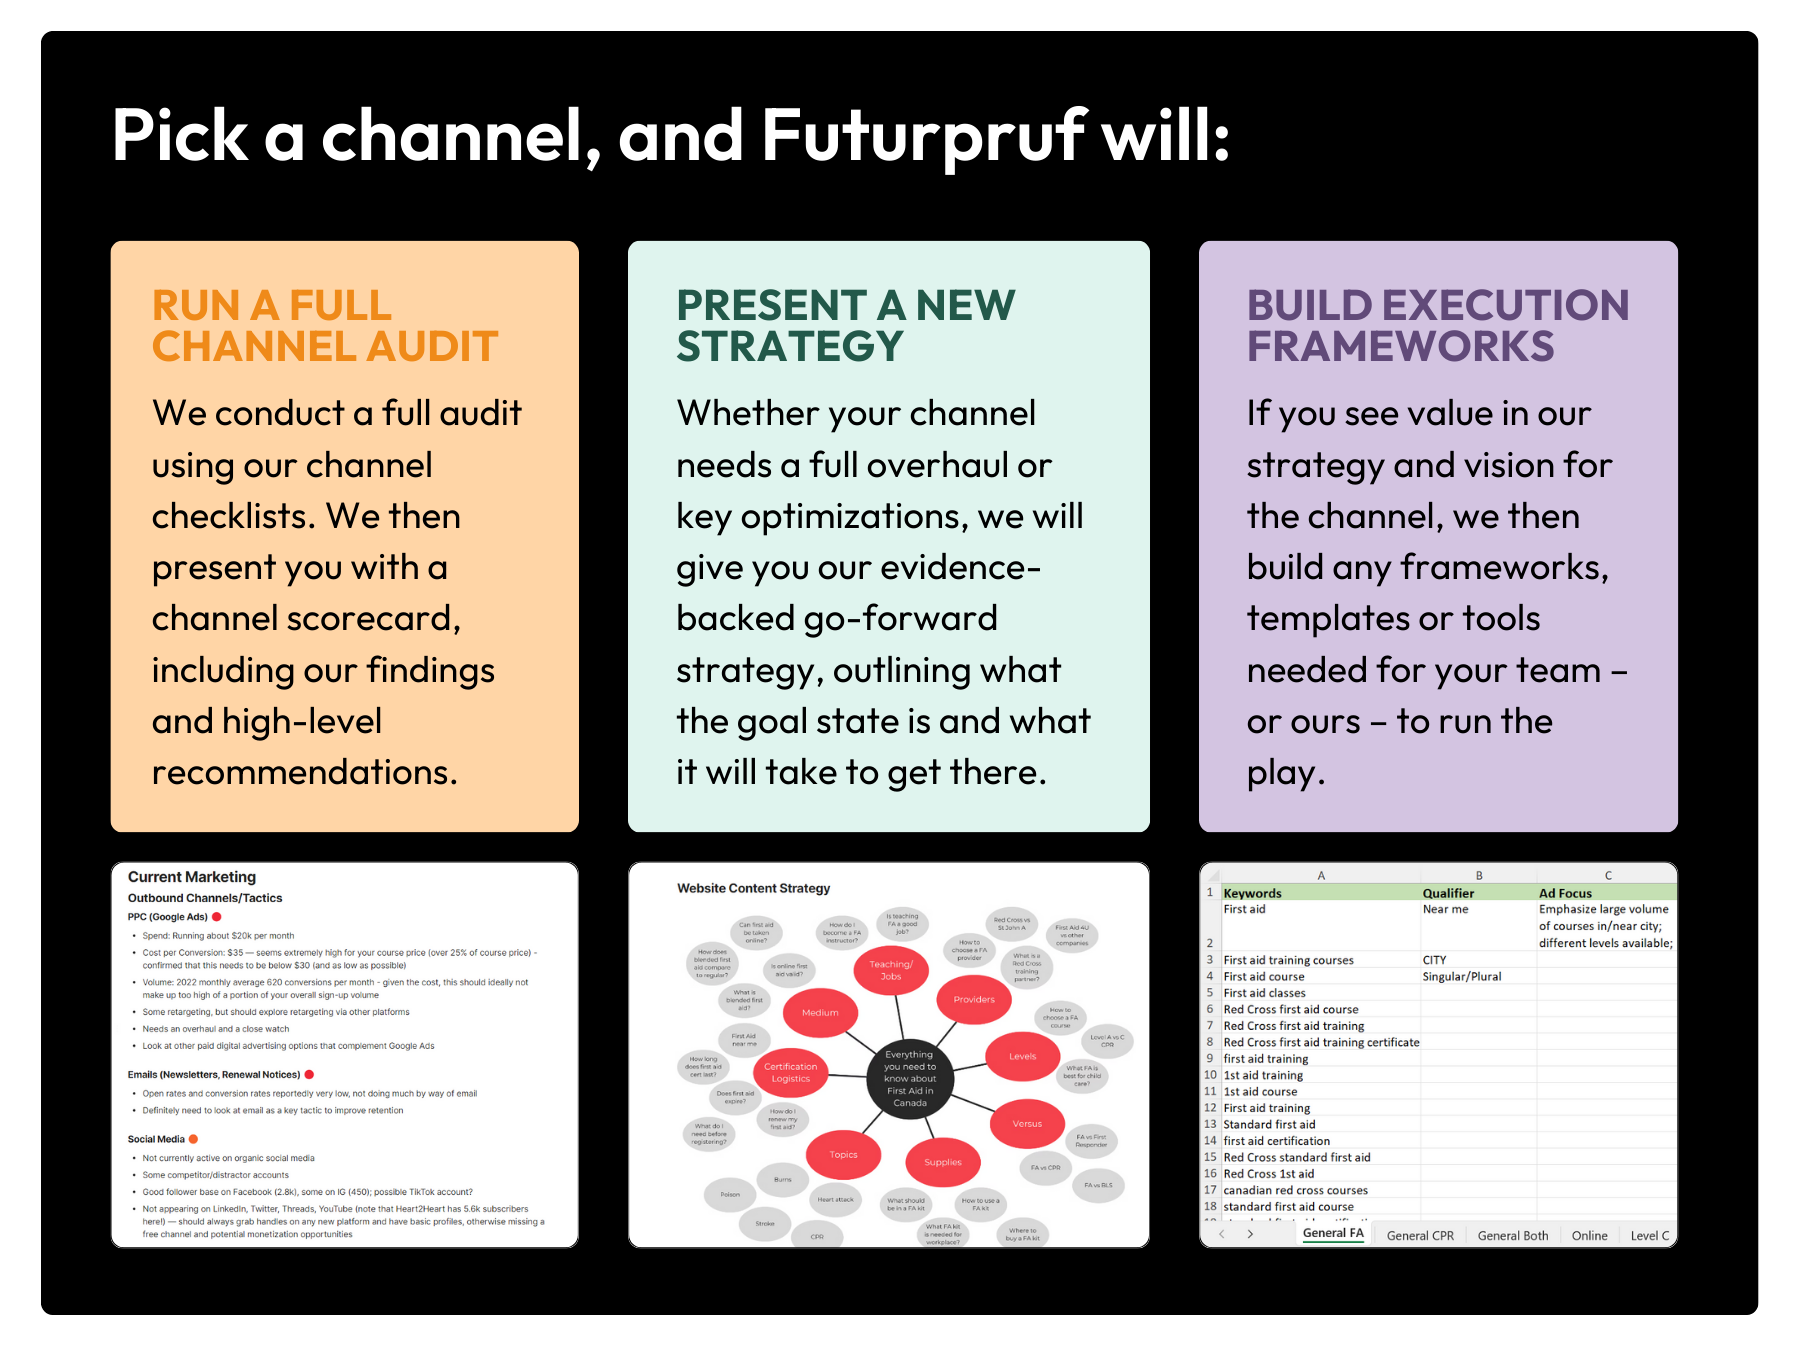 Futurpruf Marketing can optimize your marketing channels with our proven 3-stage process.